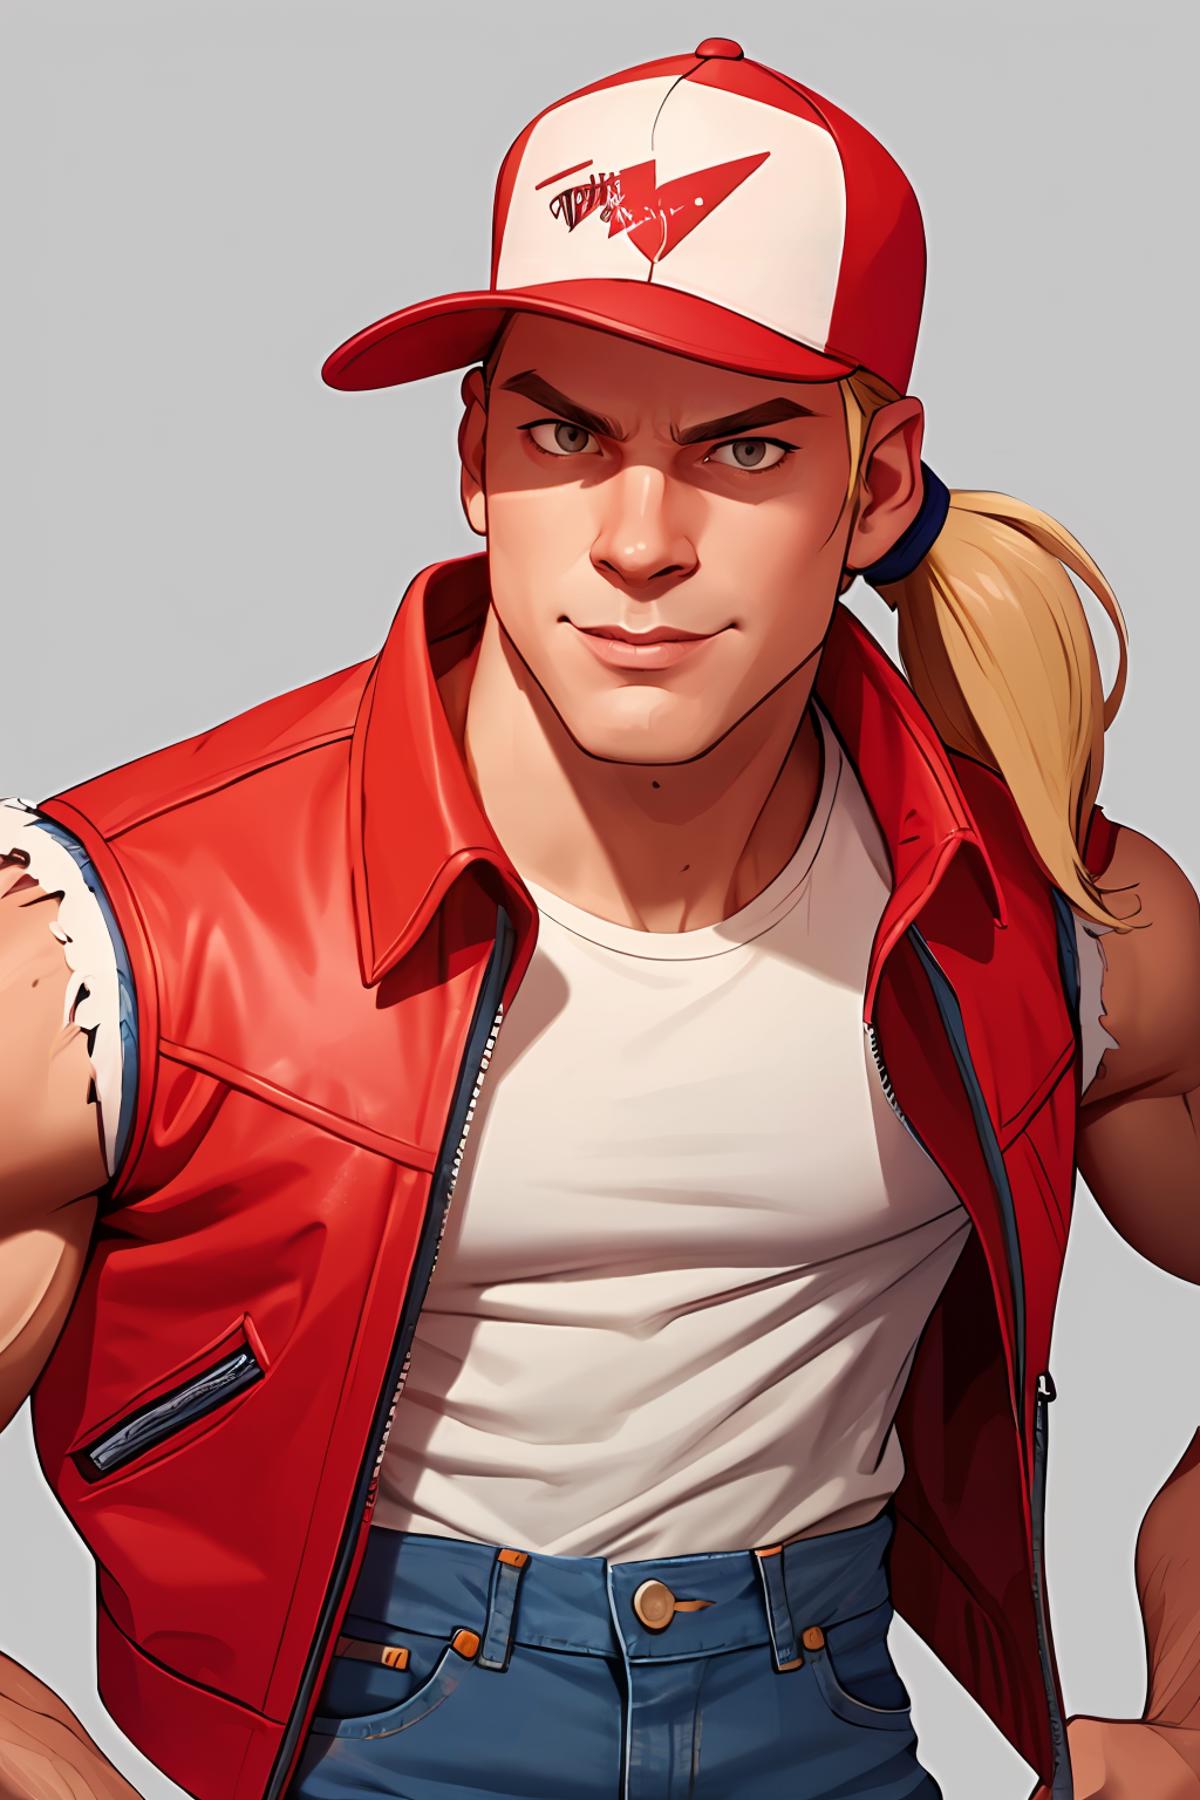 Terry Bogard (The King of Fighters) LoRA image by aji1